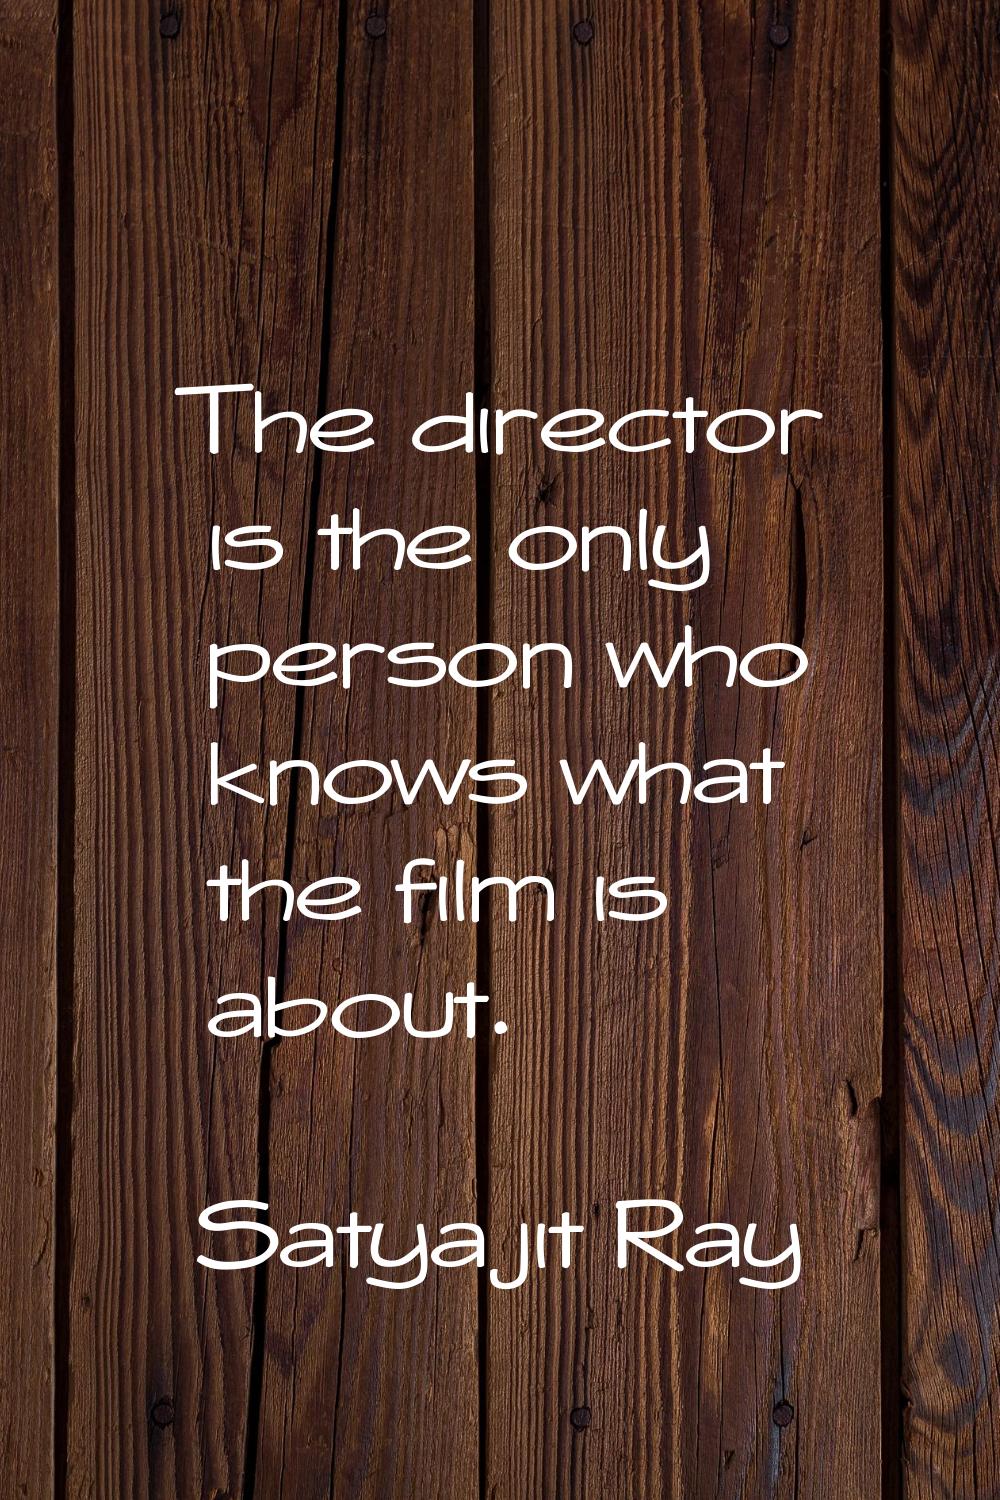 The director is the only person who knows what the film is about.